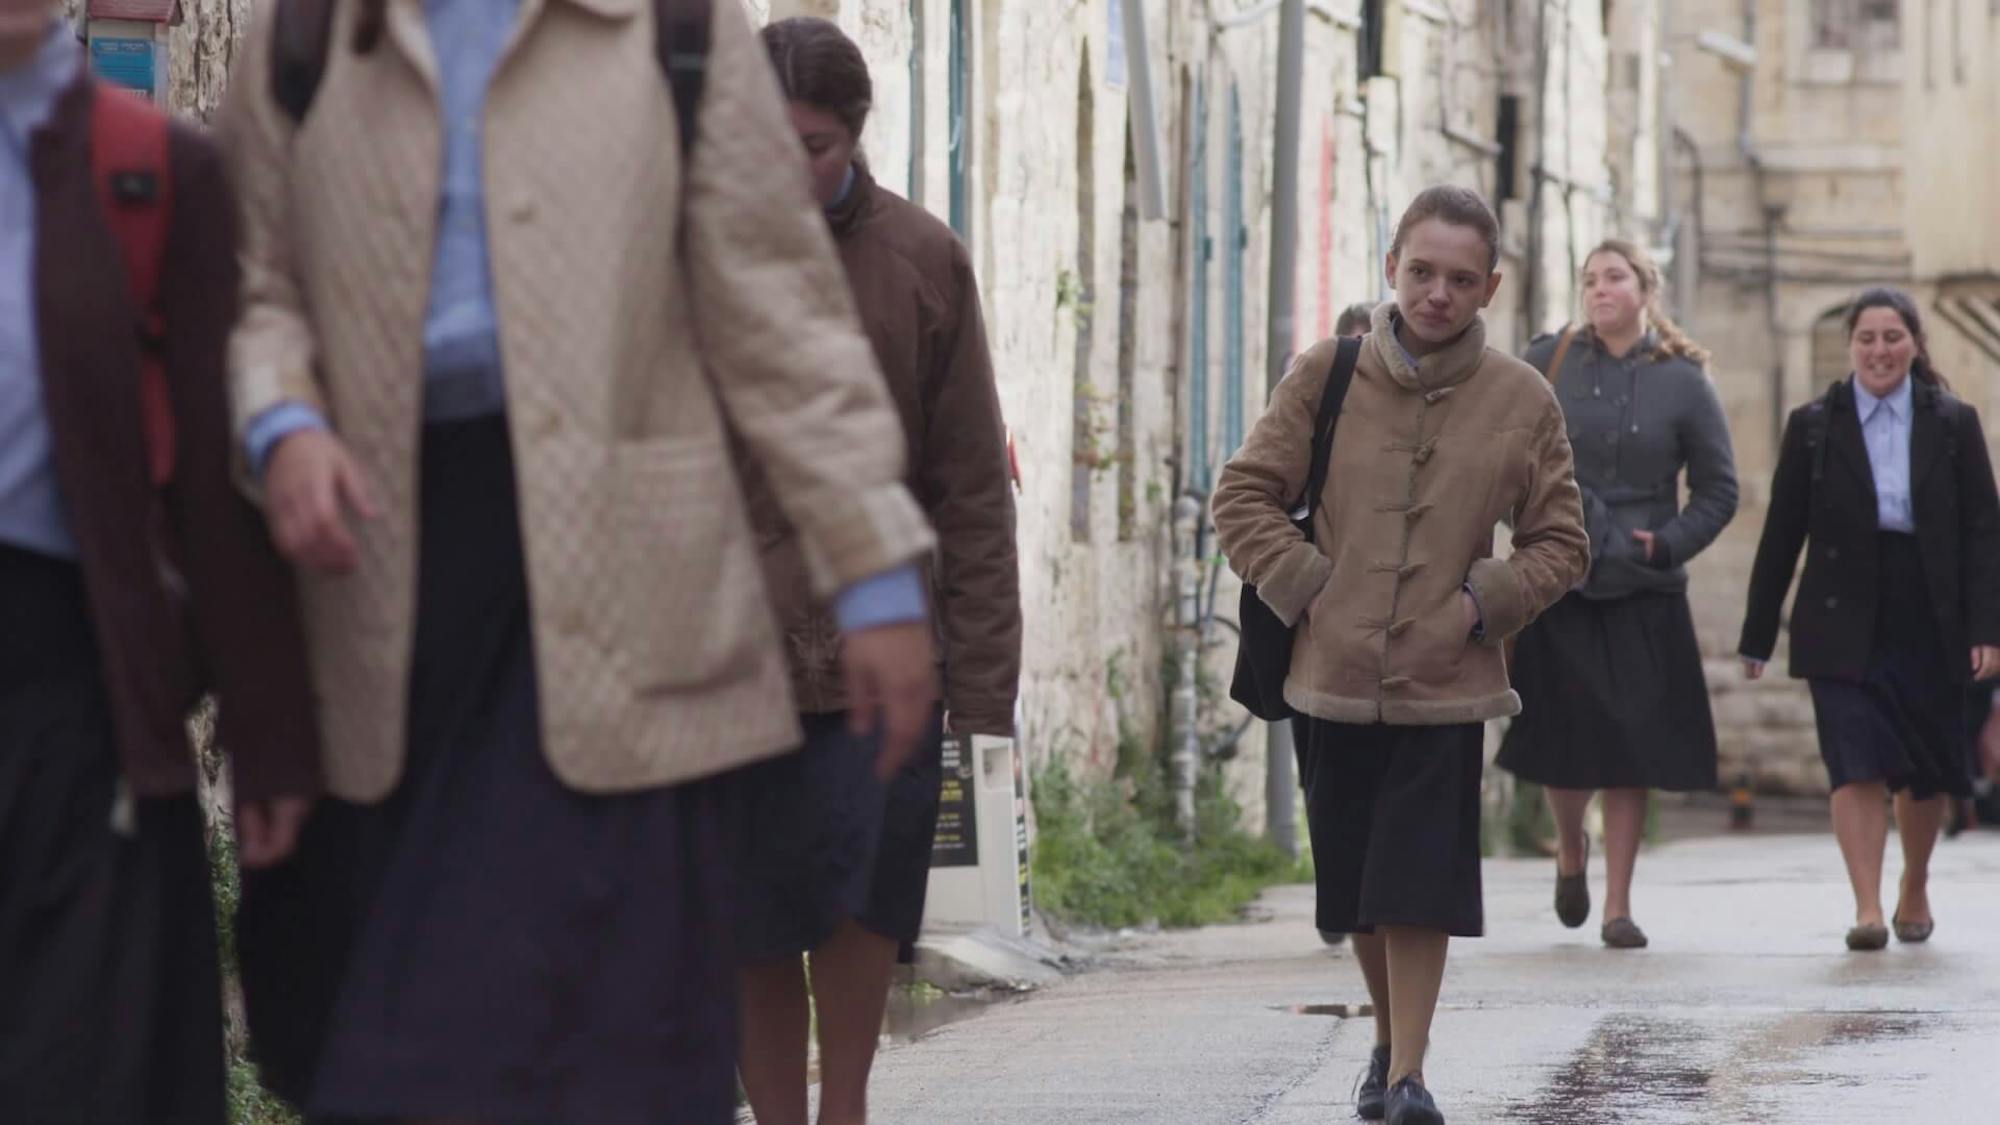 Ruchama Weiss (Shira Haas) walks down the street with others dressed in similar colors and outfits: black, navy skirts, light blue buttoned-down shirts, and tan/brown jackets.